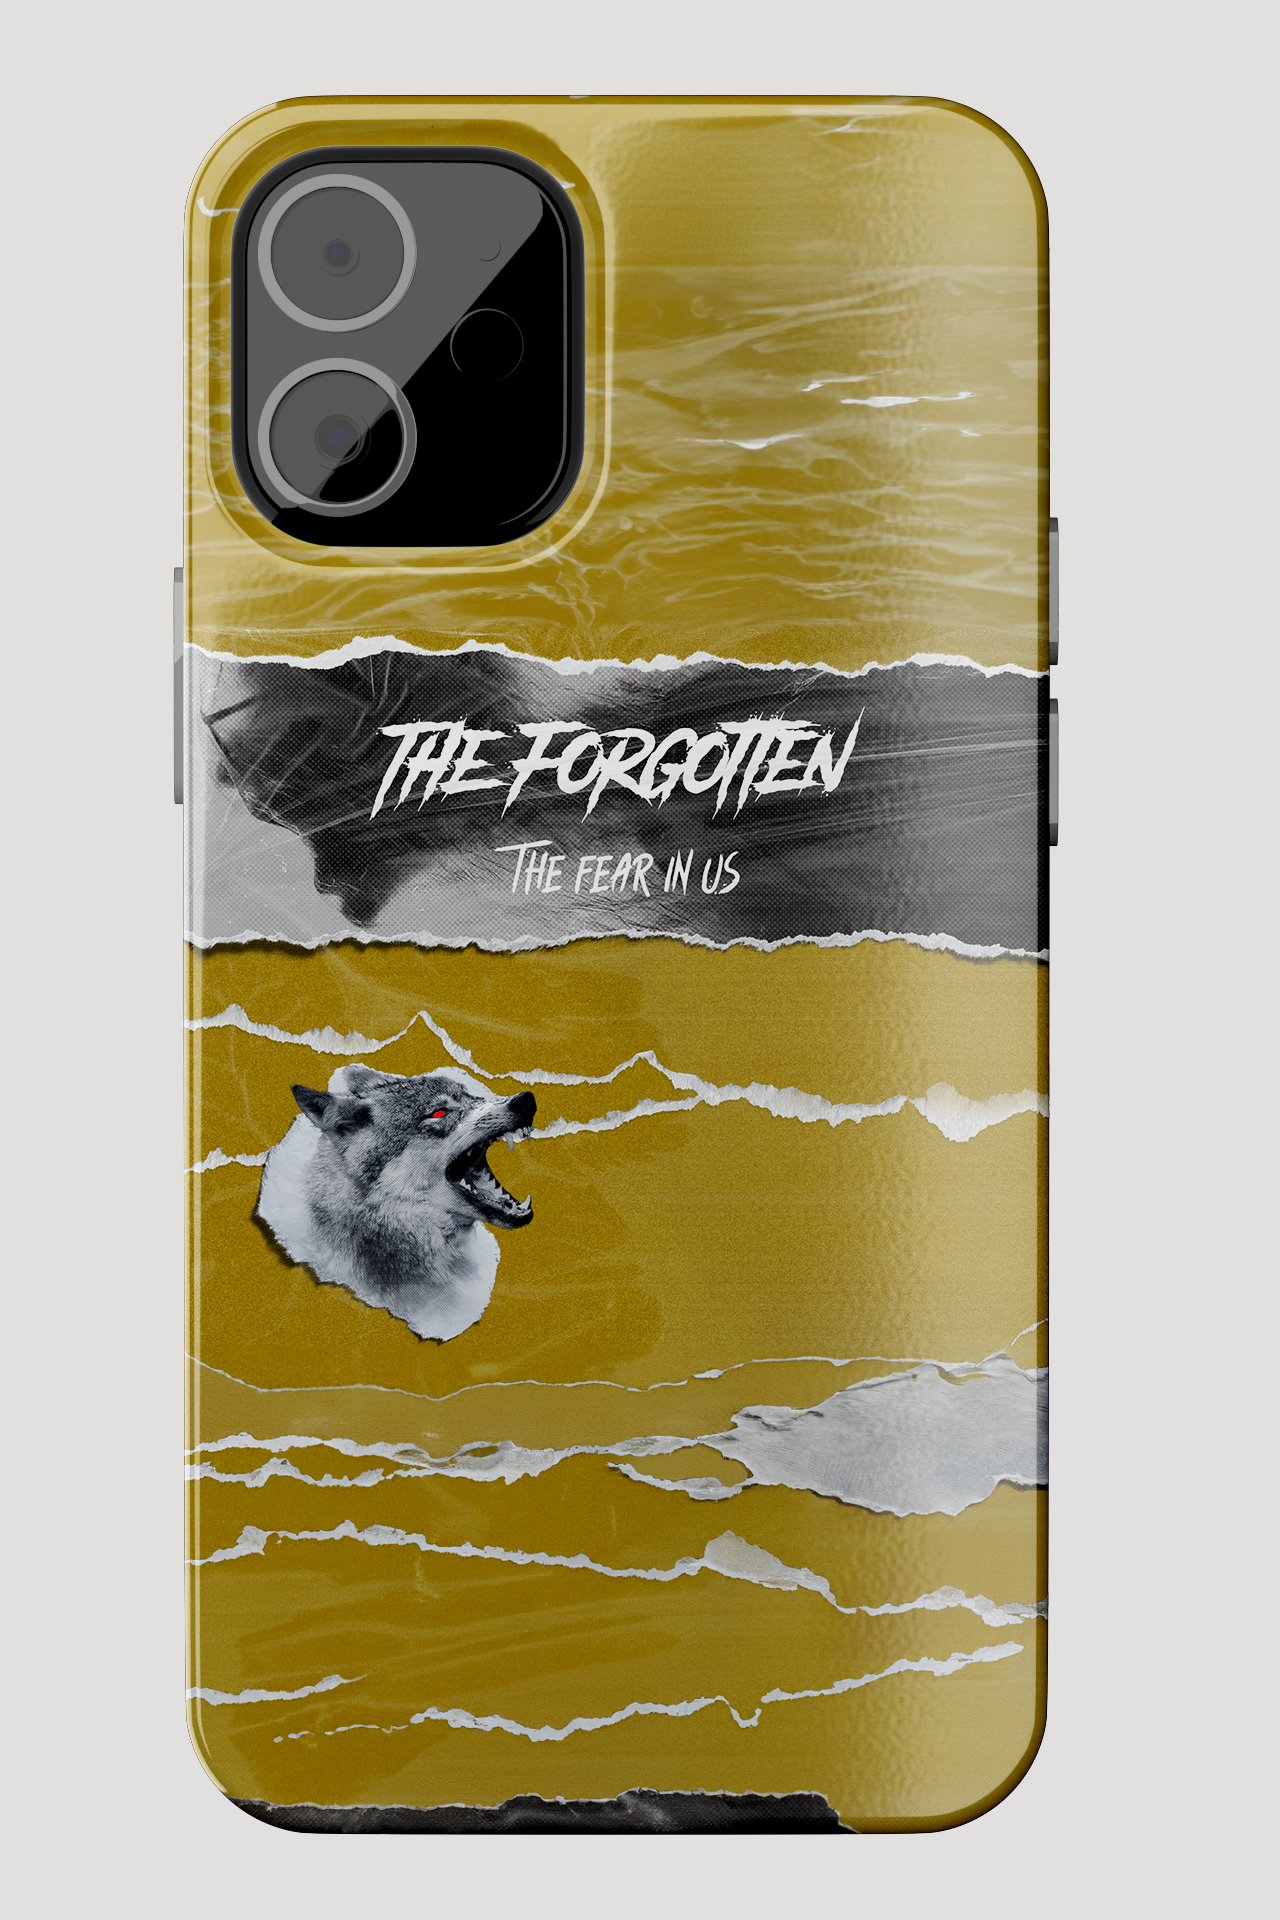 MOBILE CASE COVER: THE FORGOTTEN